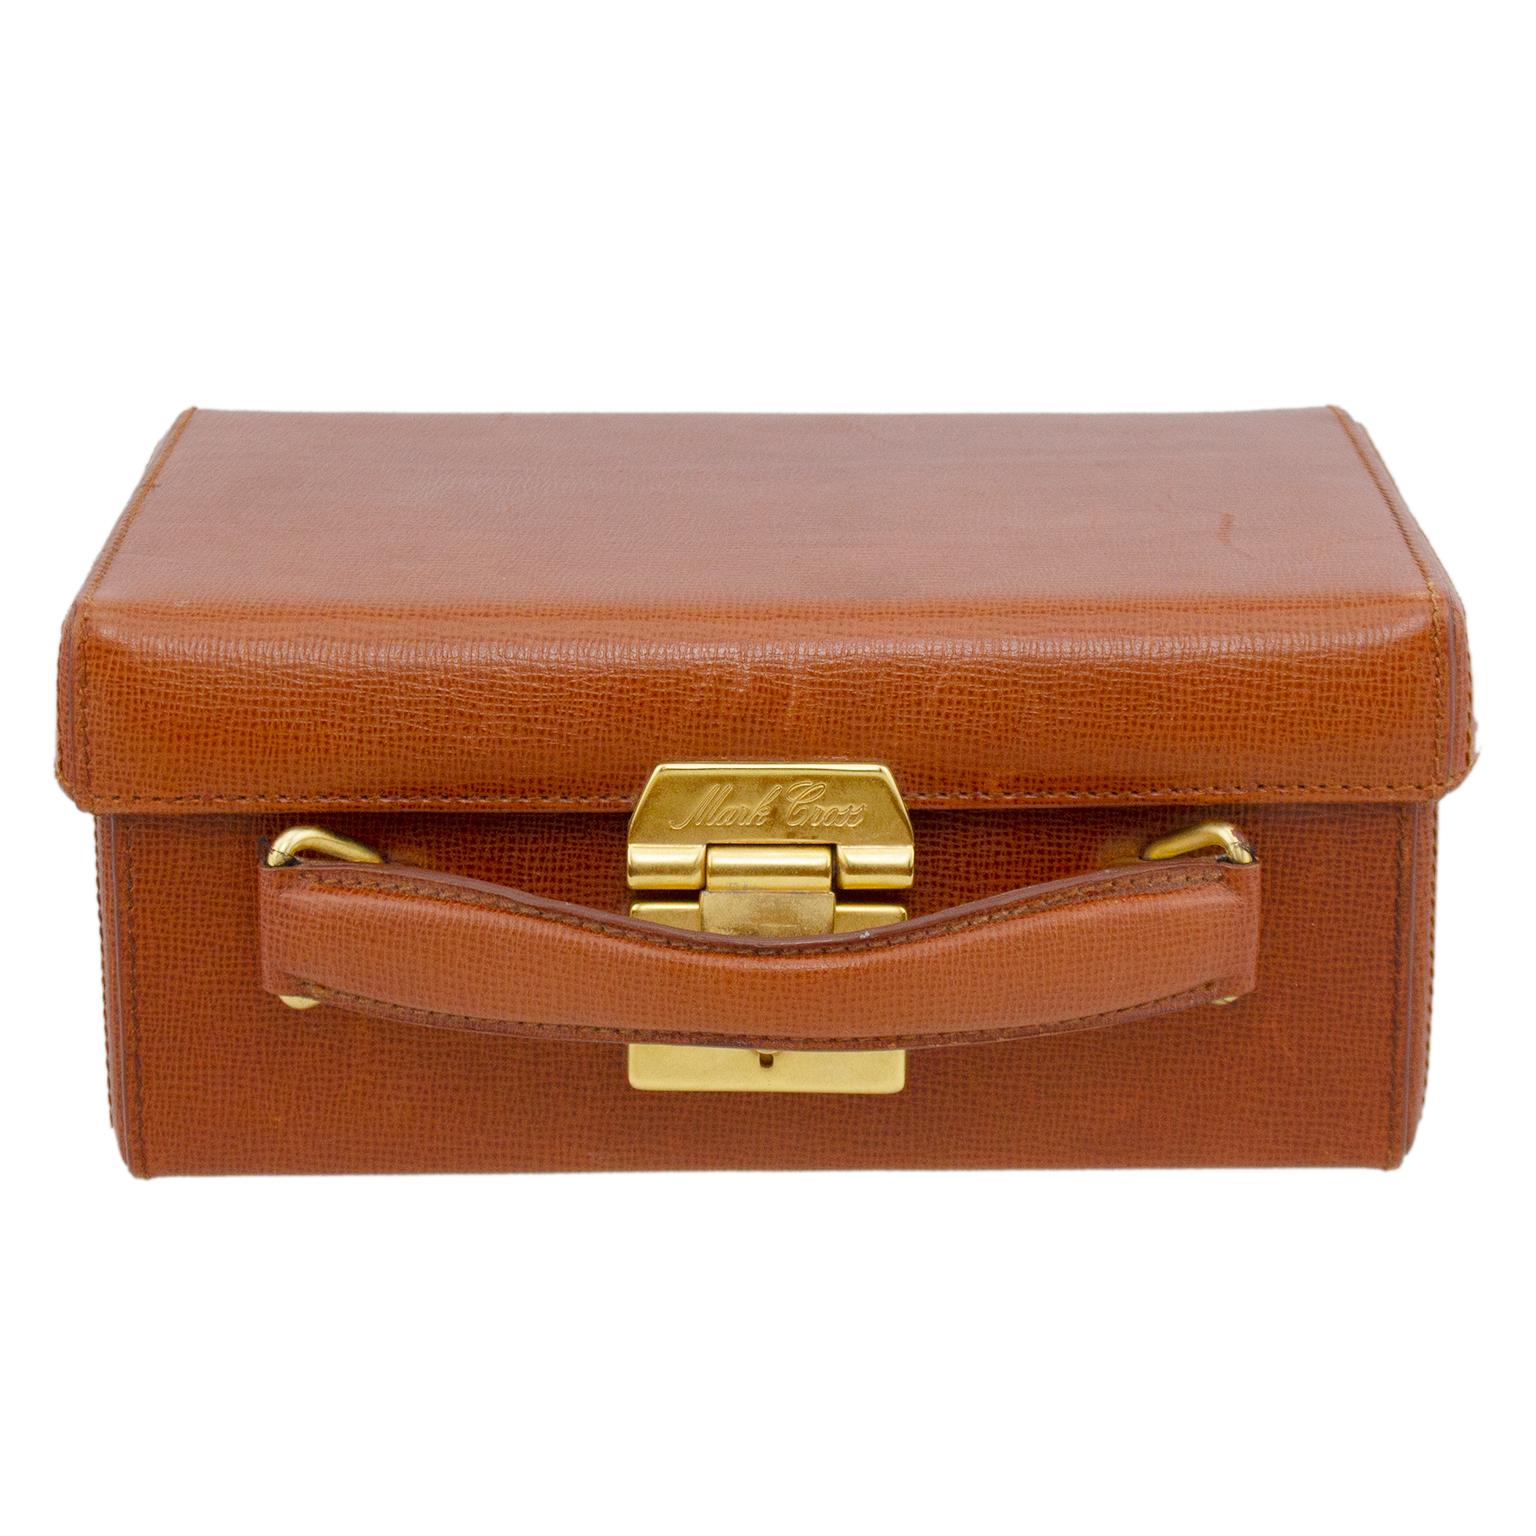 Always classic and timeless, the Mark Cross Grace box bag is named after Grace Kelly in 1954 film Rear Window. This box bag is chestnut brown rigid leather with gold tone hardware and a top handle. The bag opens to a tan leather interior with a